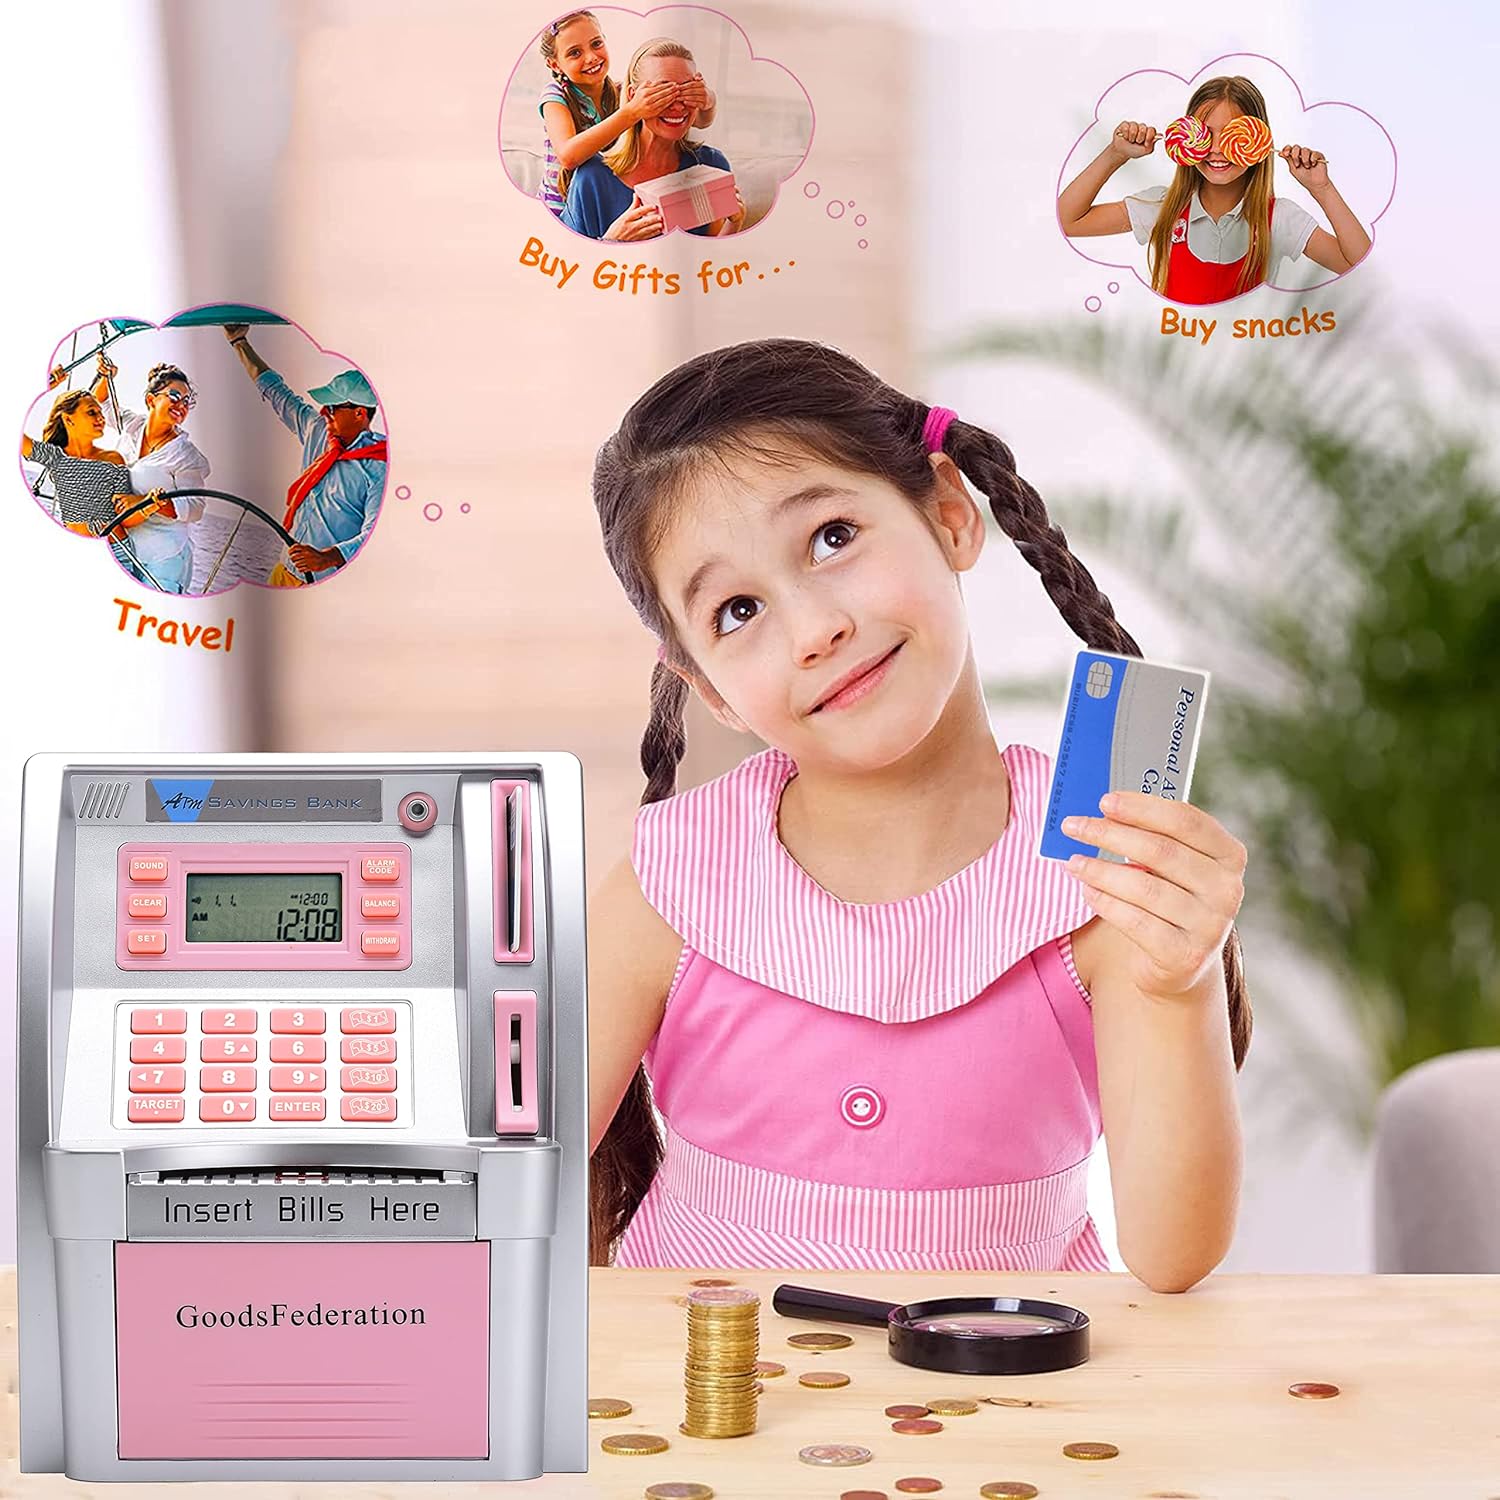 Upgraded Talking ATM Piggy Bank for Kids Adults,Toy Money Bank for Real Money with Voice Prompt,Data Save,Card,Saving Target,Balance Calculator,Electronic Money Safe Coin Box,Hot Gift for Boys Girls